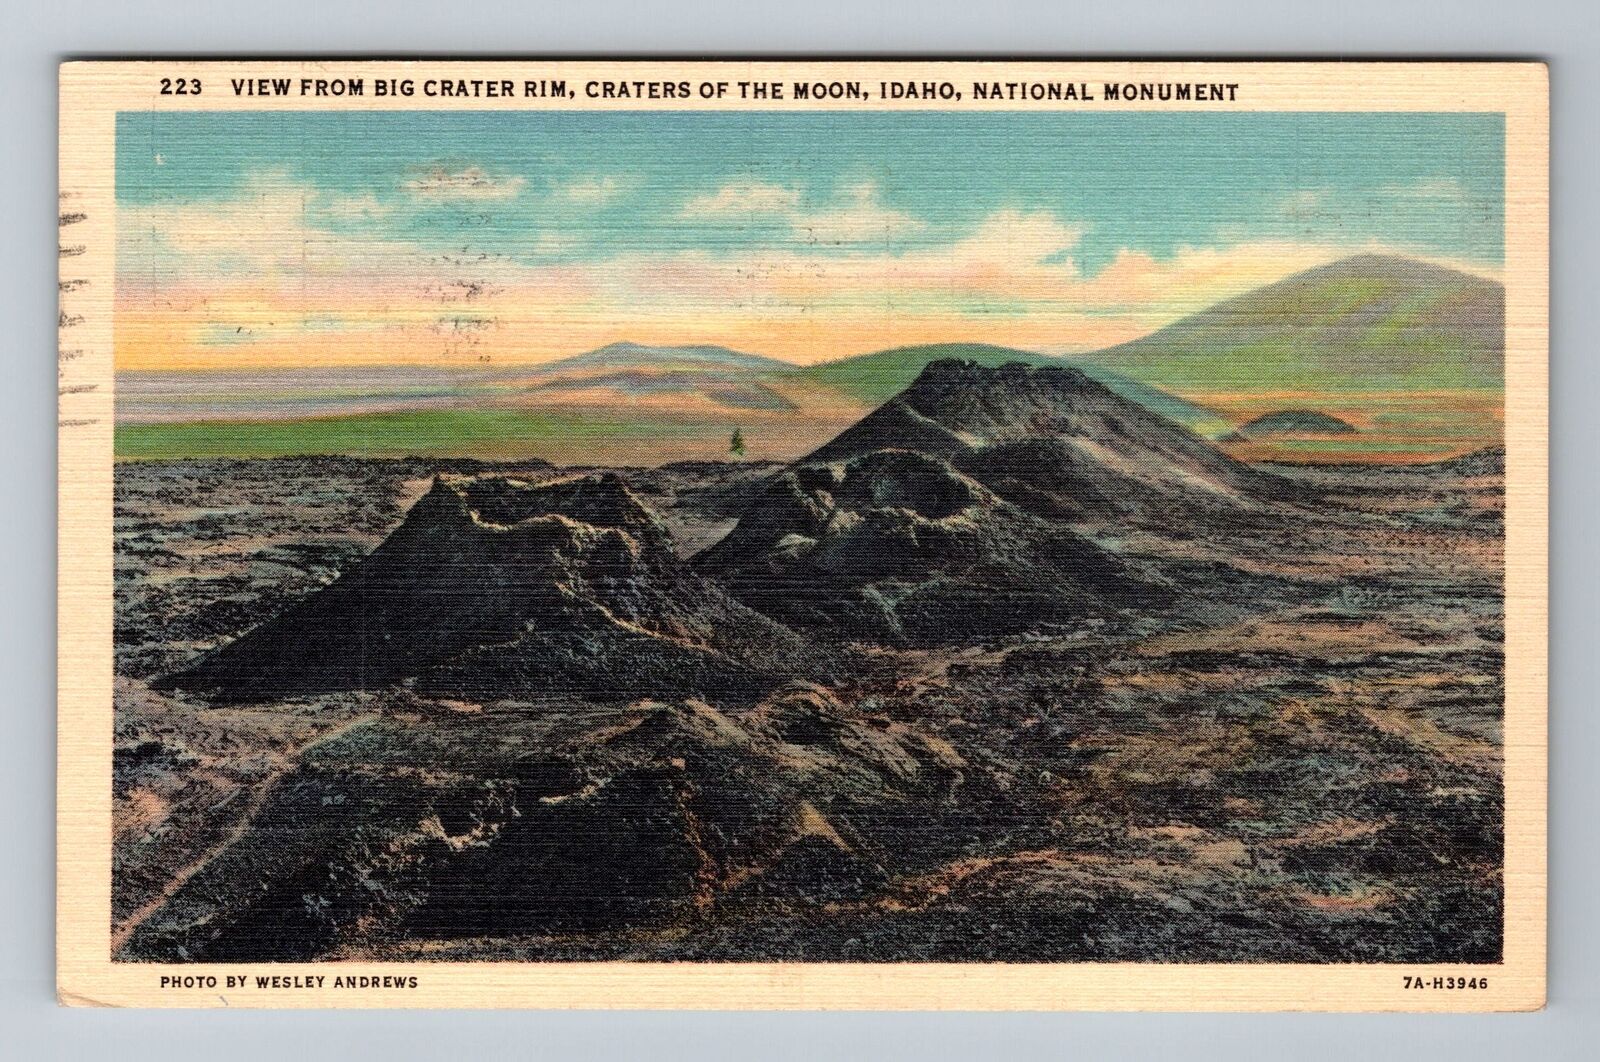 ID-Idaho, Craters the Moon, View from Big Crater Rim, c1939, Vintage Postcard